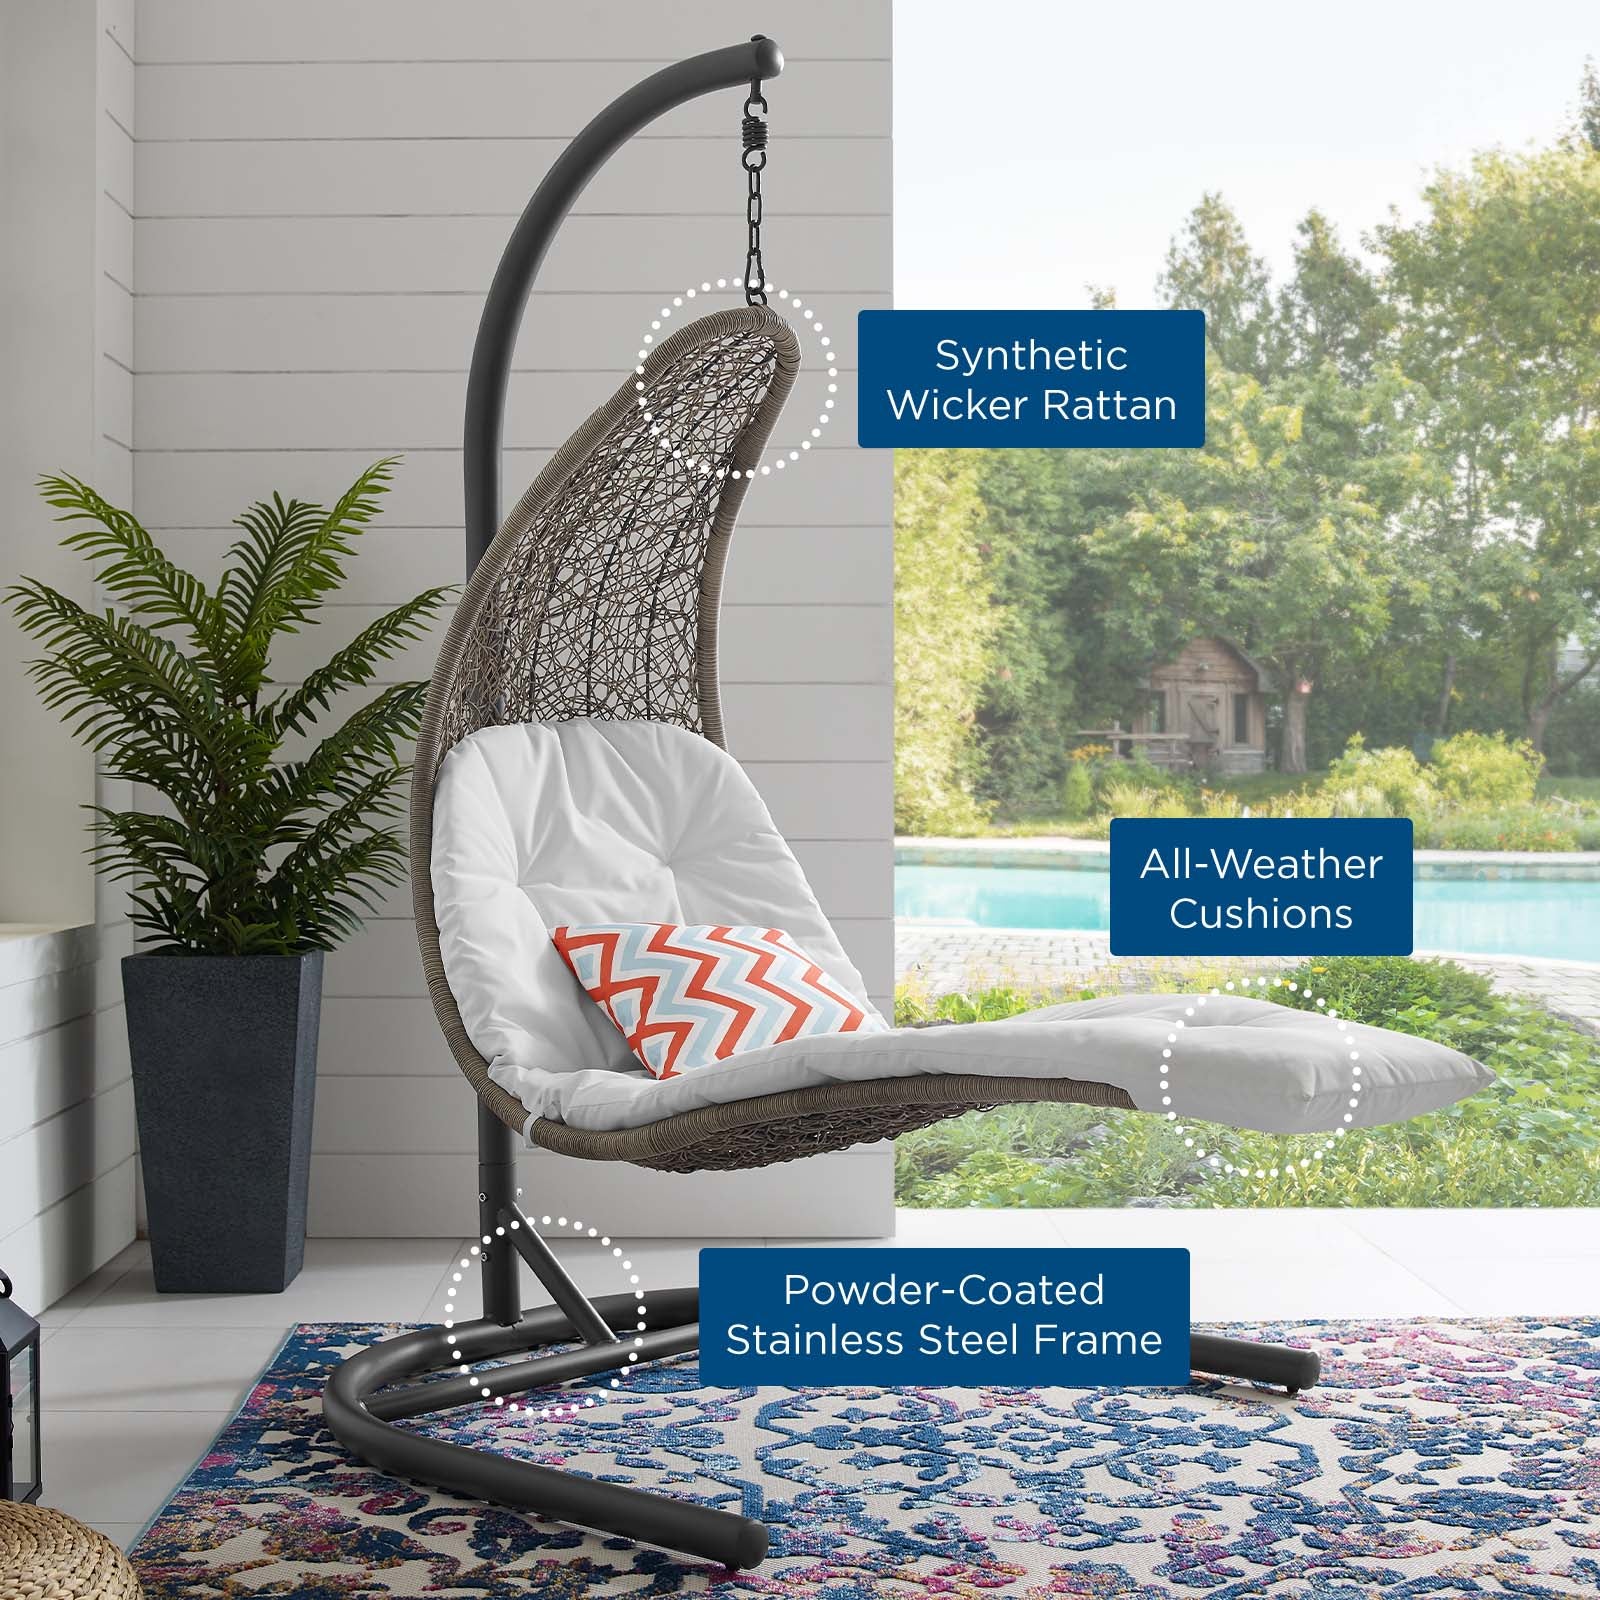 Modway Outdoor Swings - Landscape Hanging Chaise Lounge Outdoor Patio Swing Chair Light Gray White